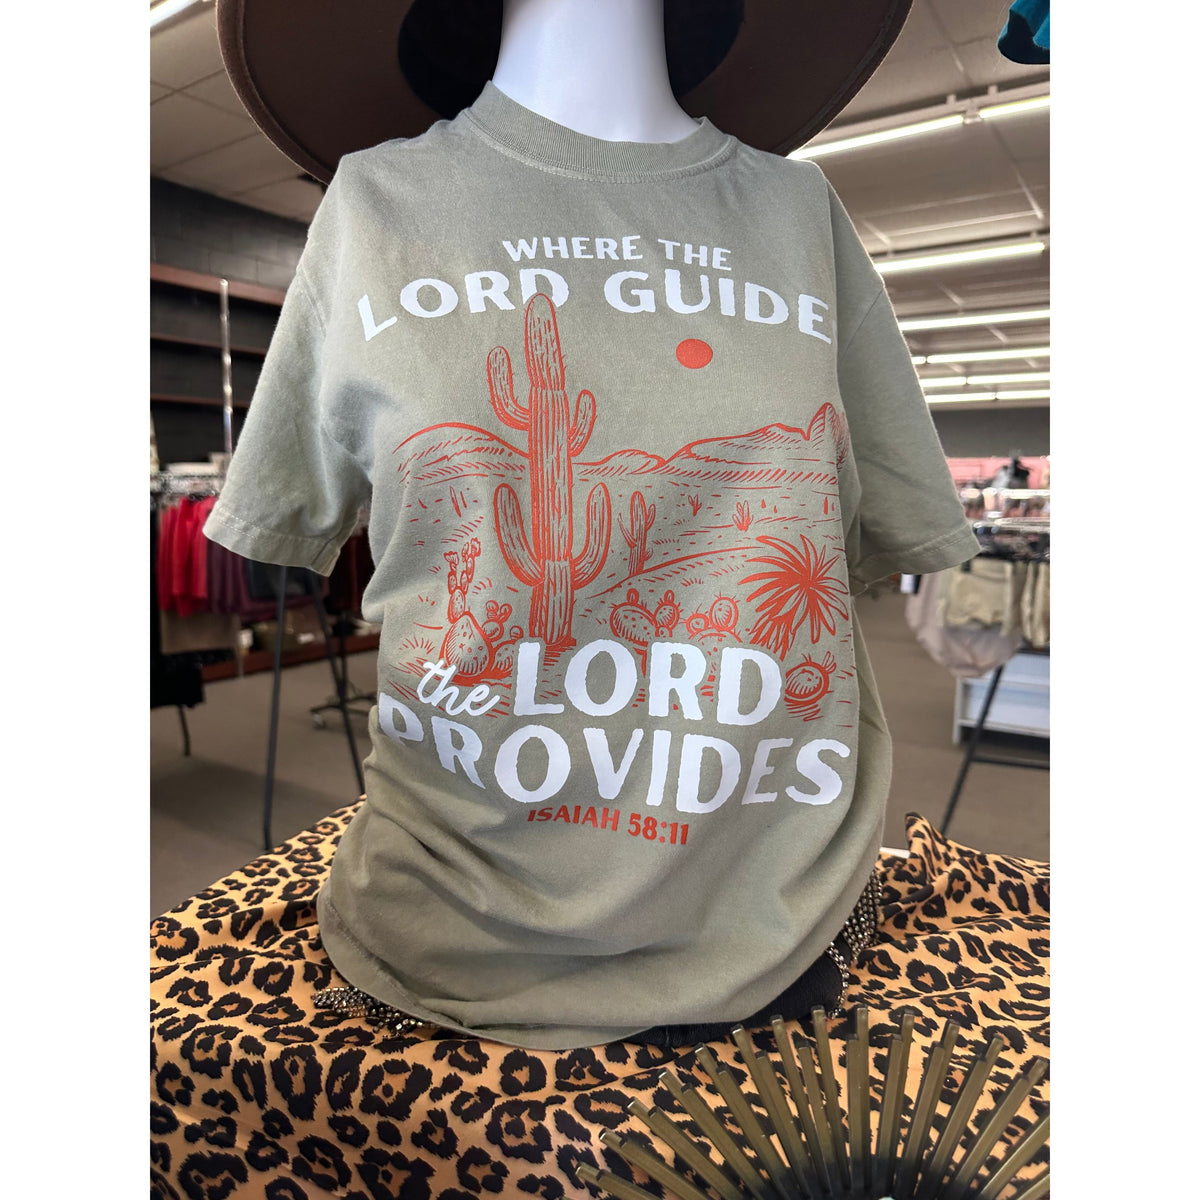 Where the Lord Guides tee